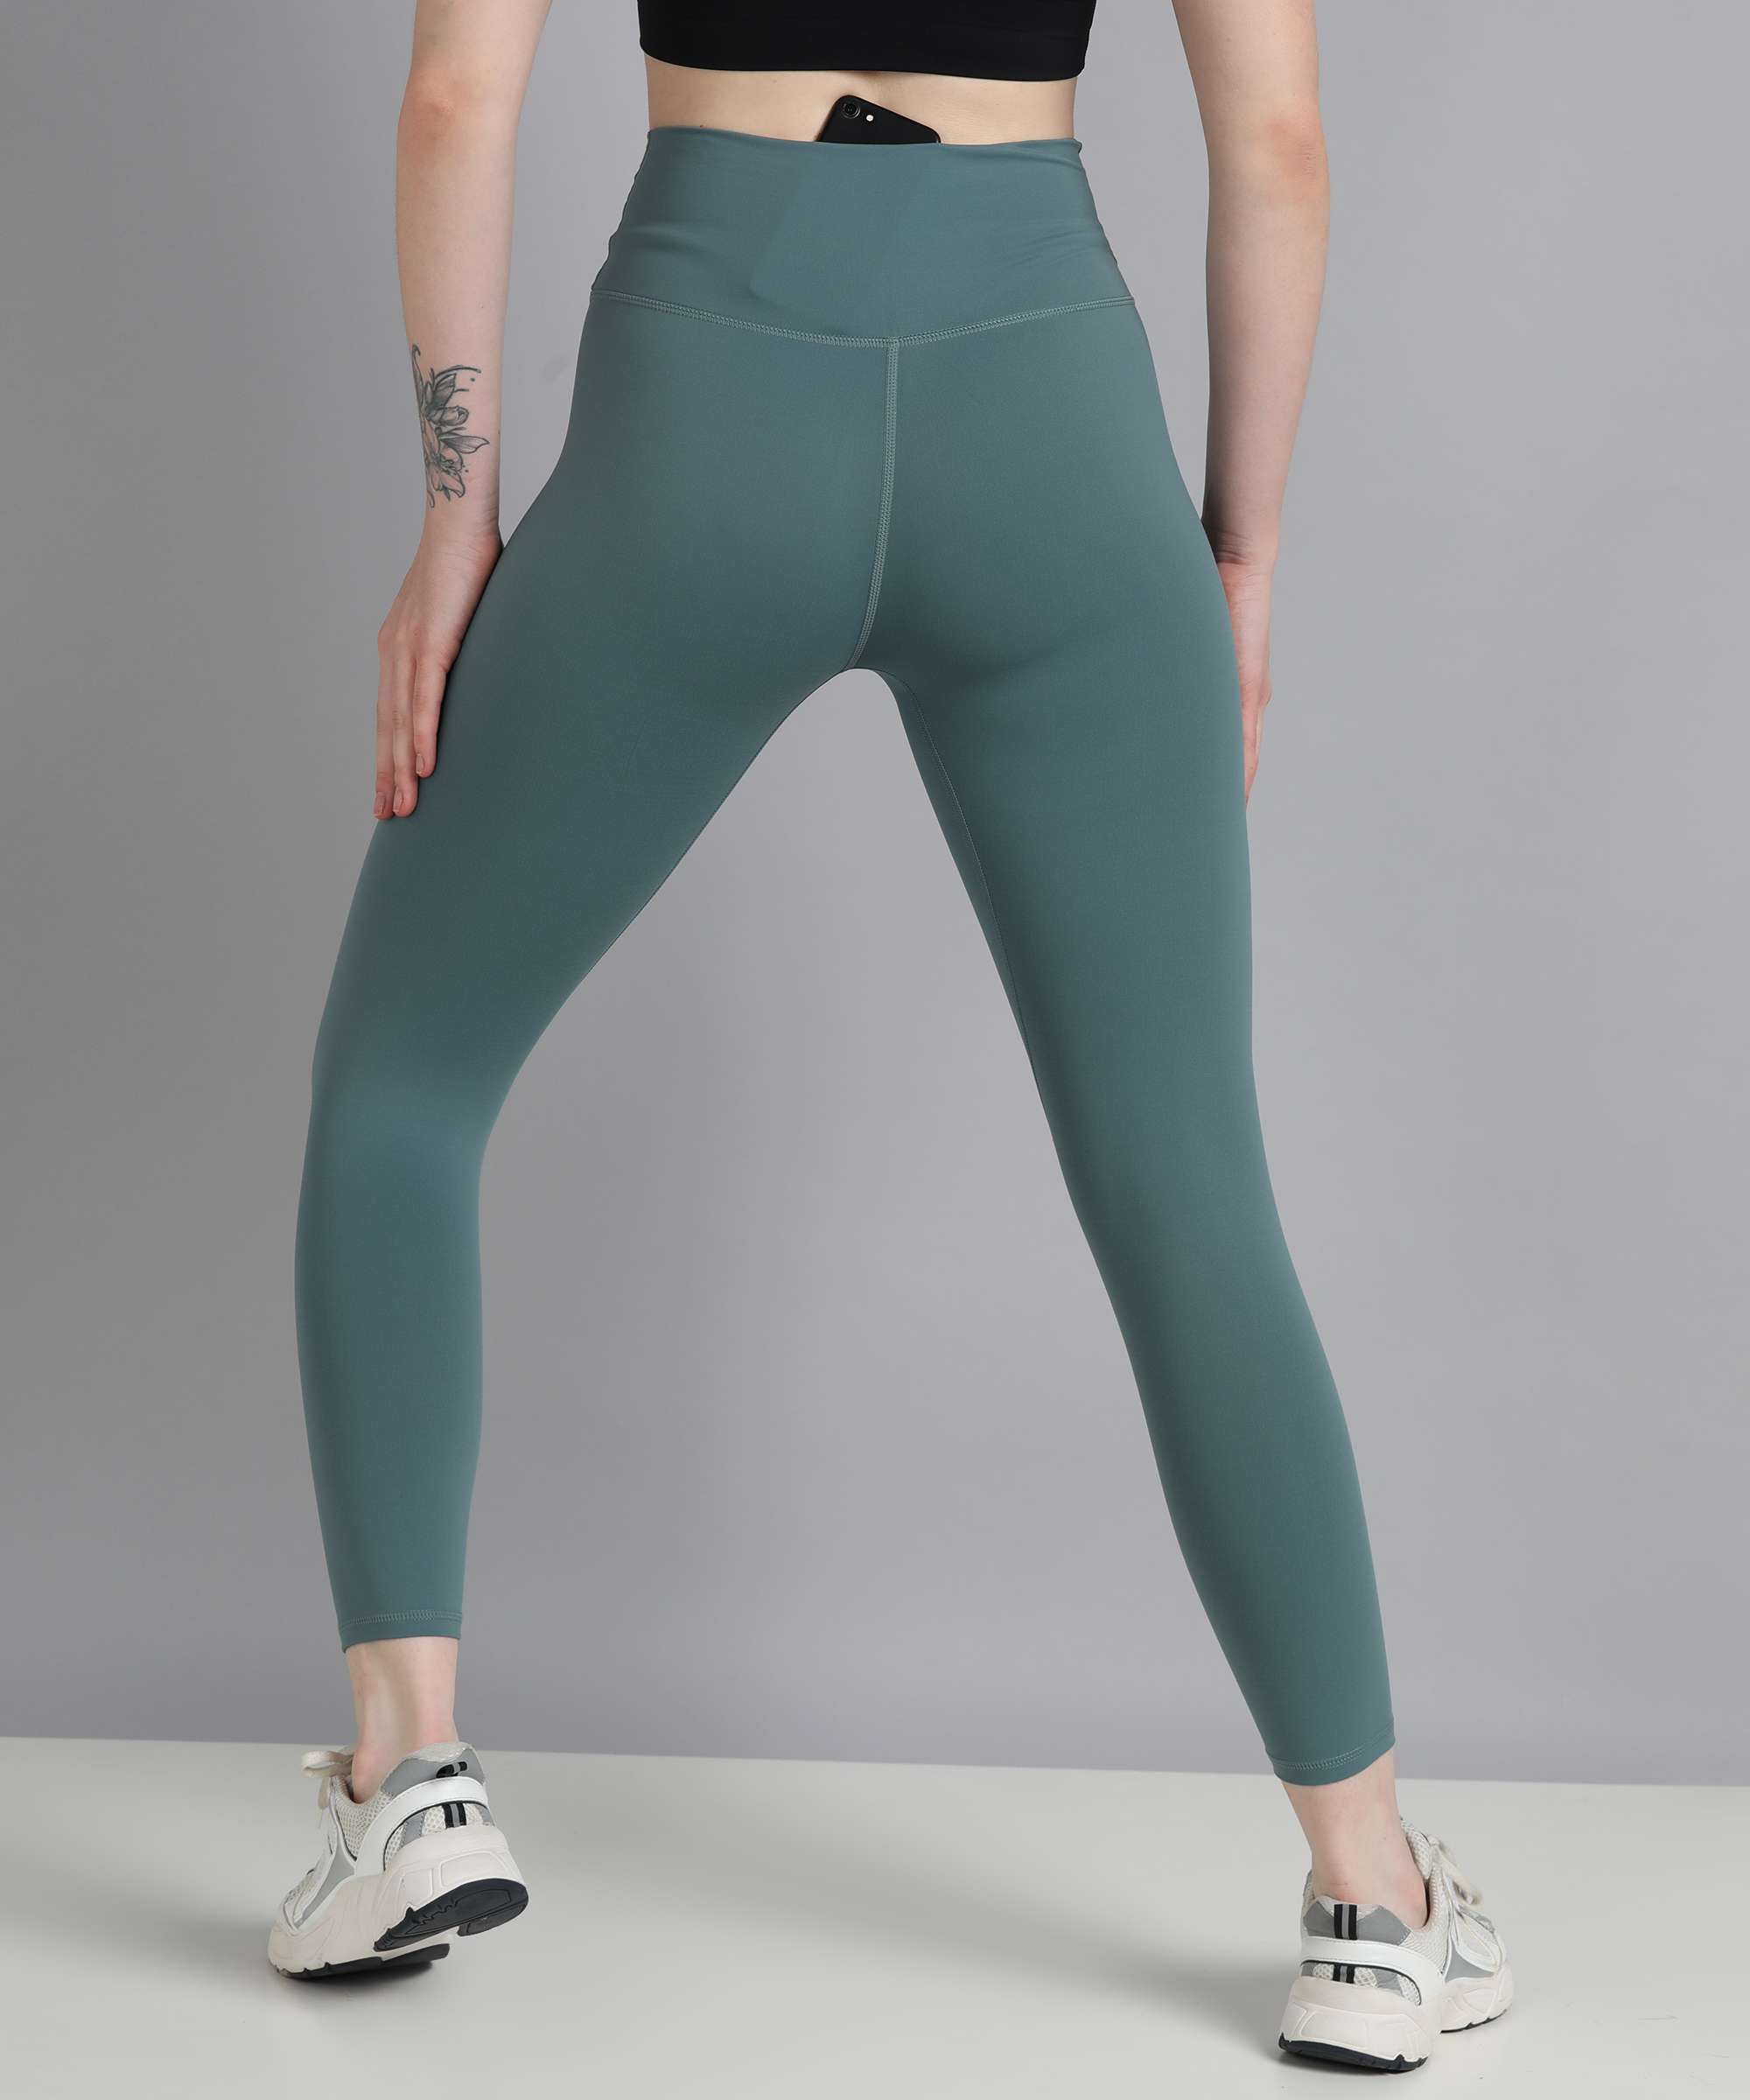 Solid Seamless Leggings With Pocket Women Soft Workout Tights